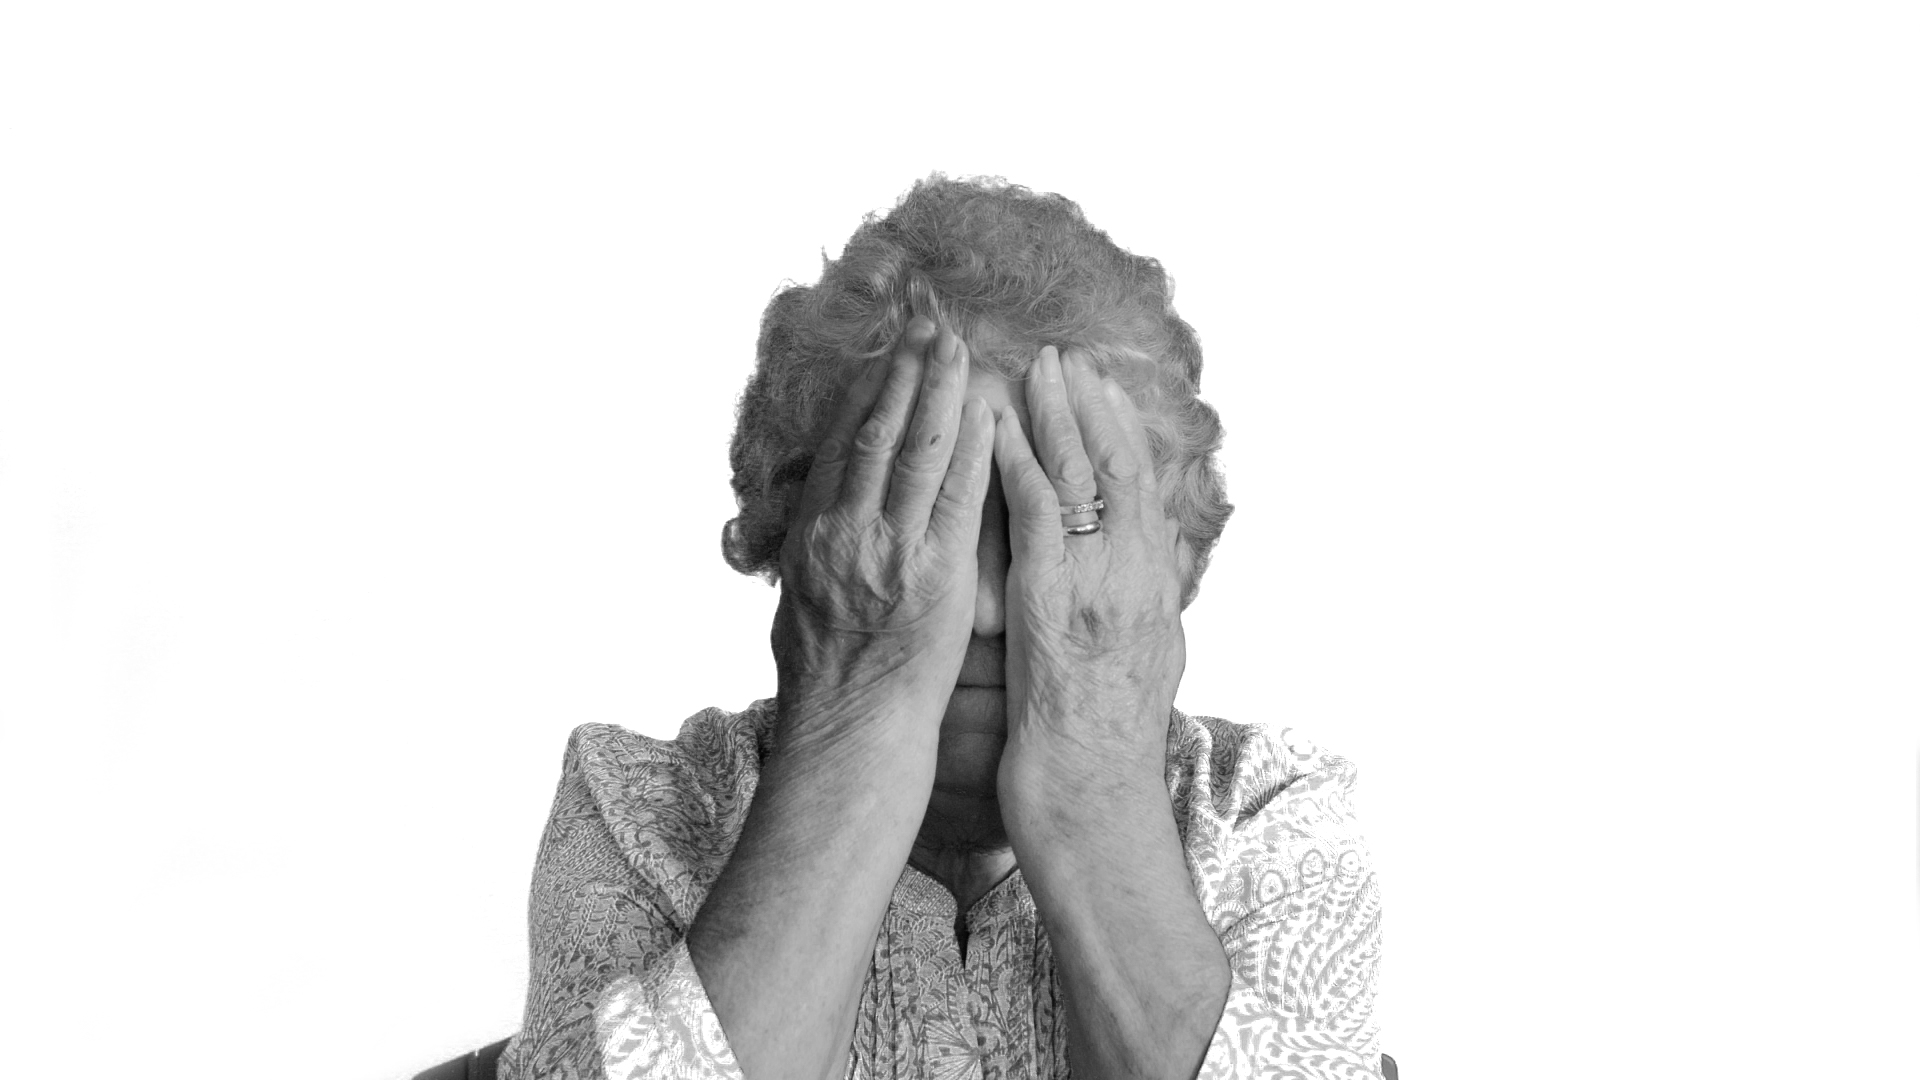 Monotone image of lady covering her face with her hands